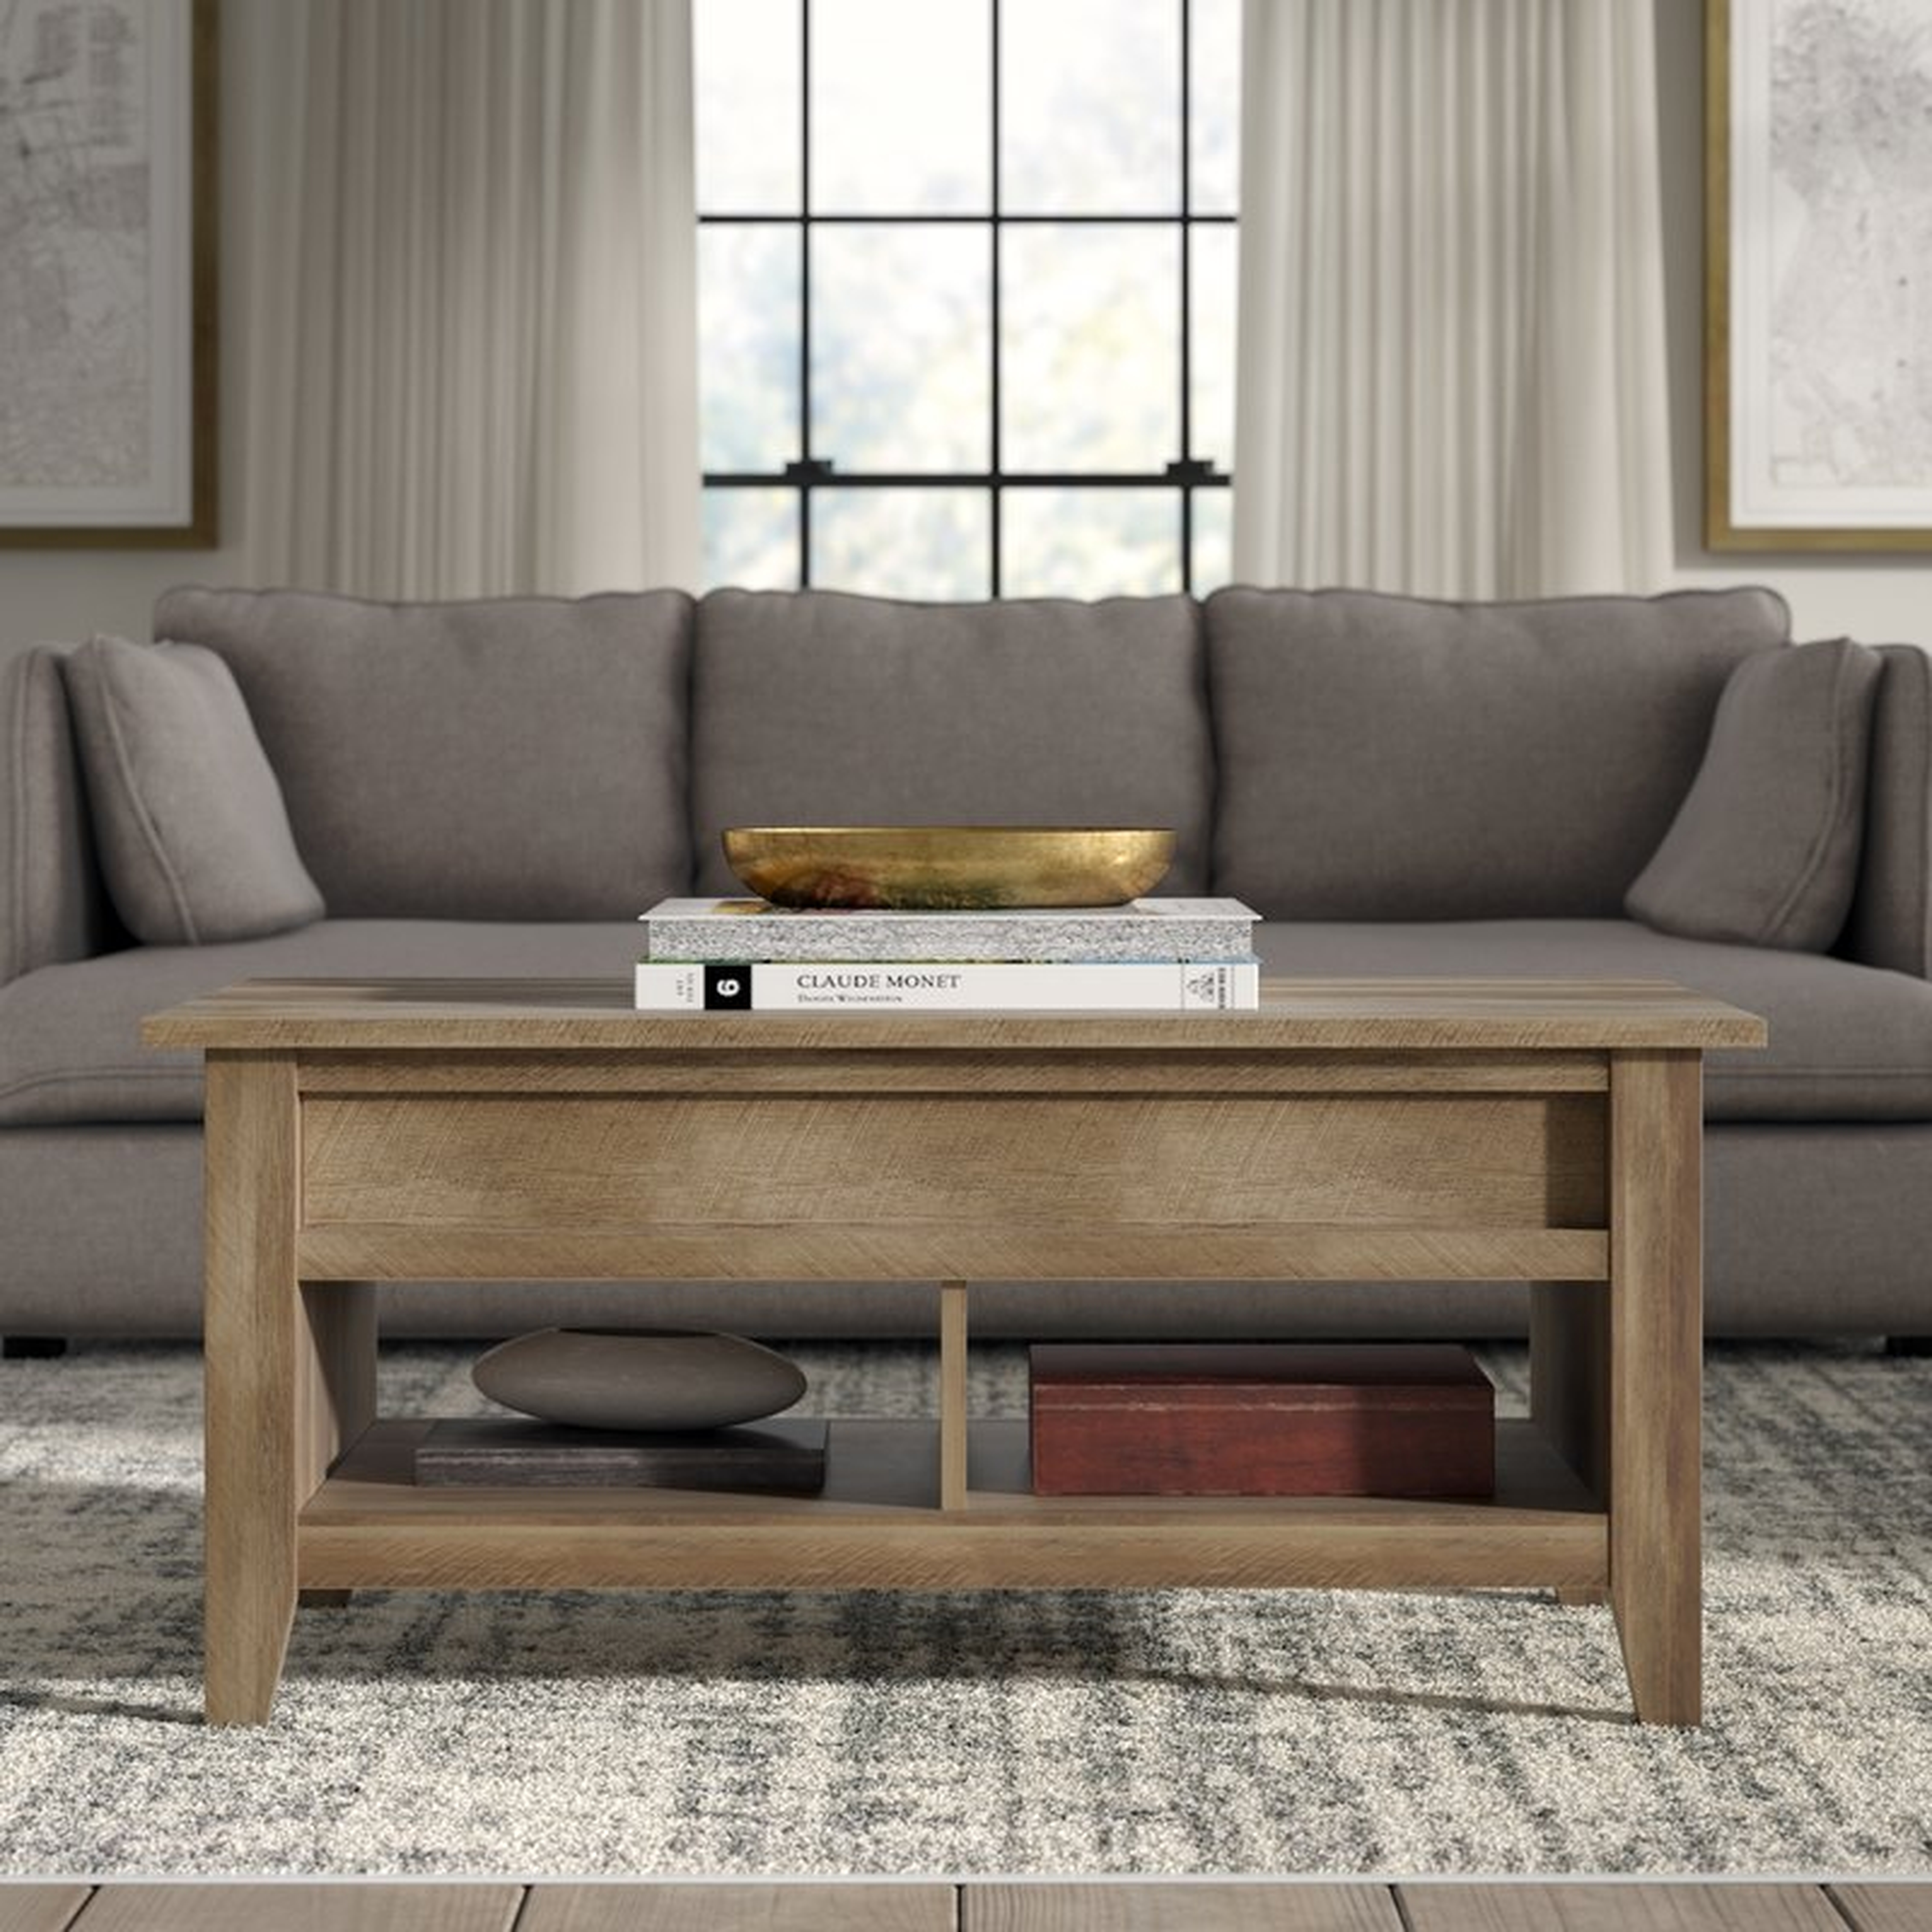 Riddleville Lift Top Coffee Table with Storage - Wayfair